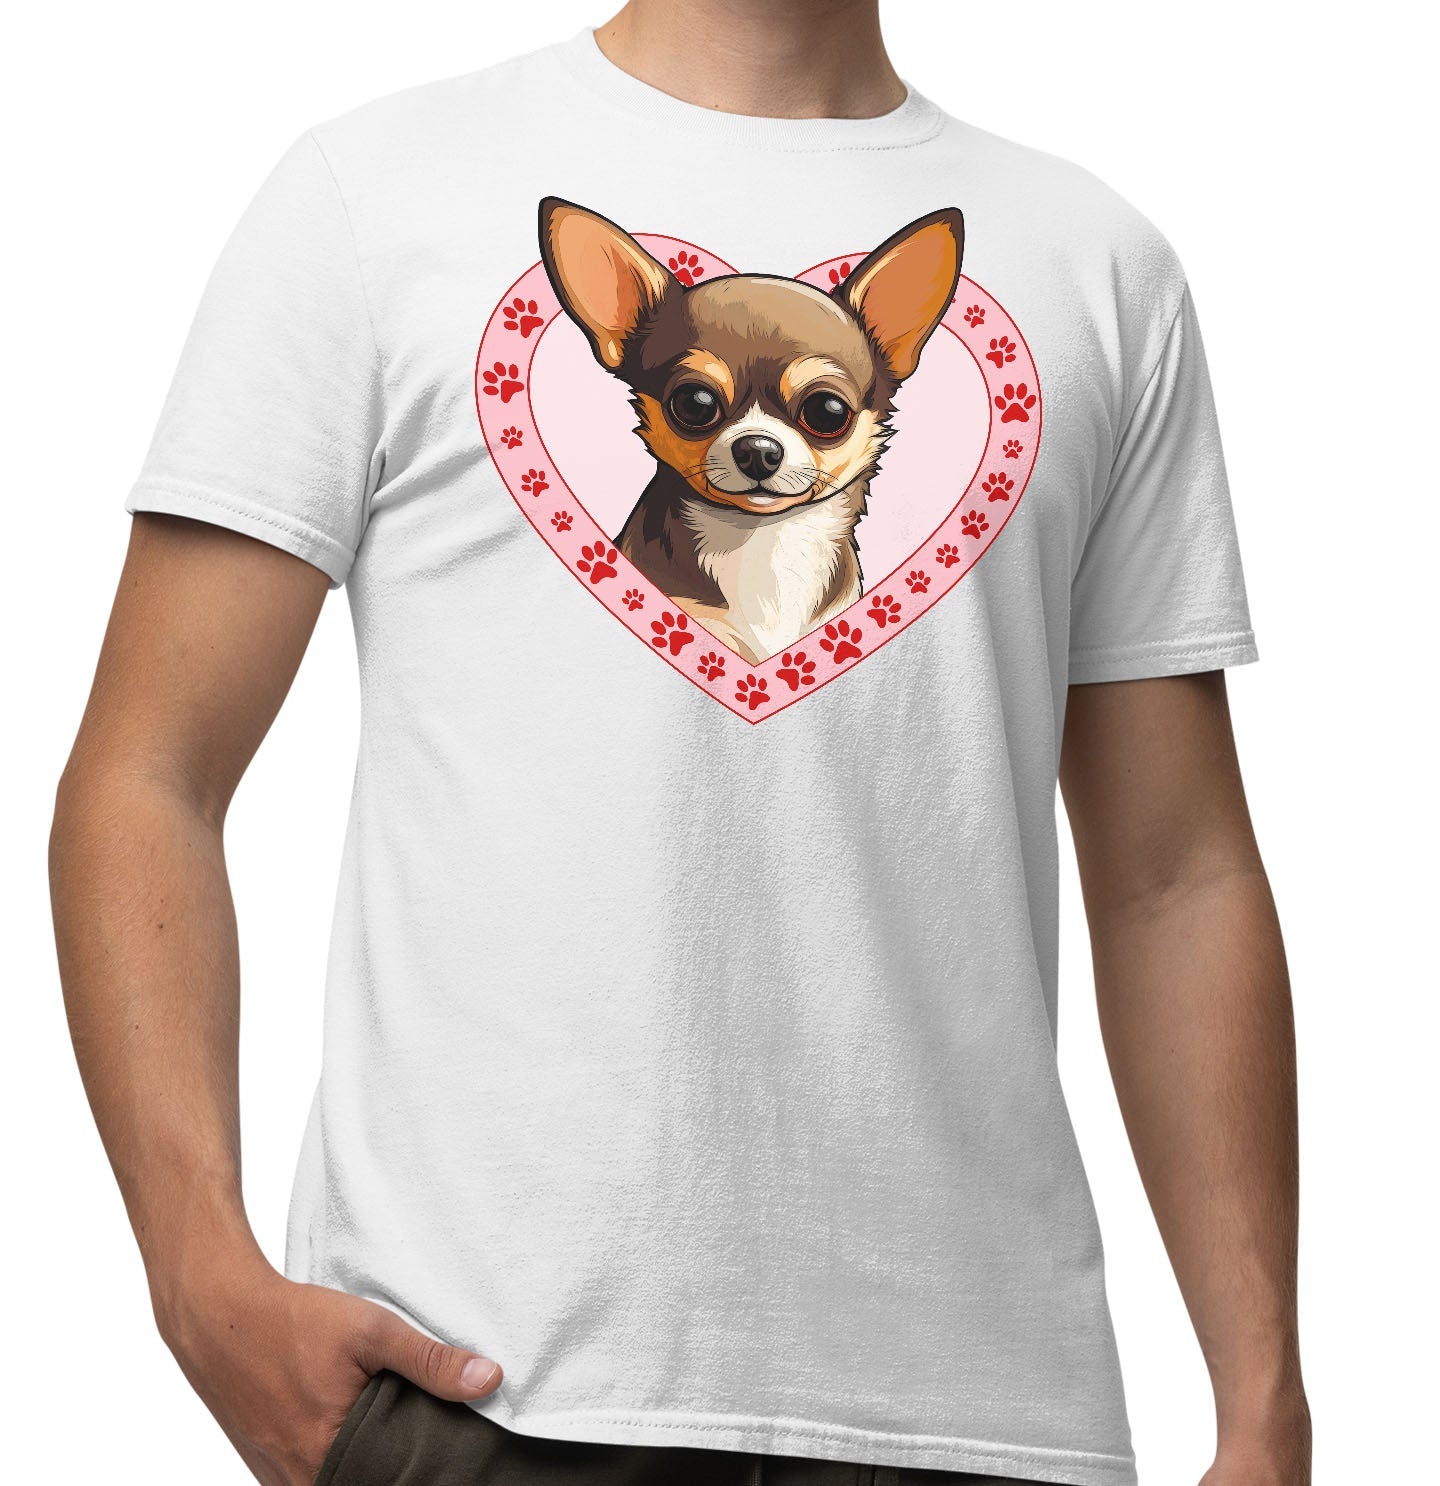 Chihuahua (Chocolate & Tan) Illustration In Heart - Adult Unisex T-Shirt